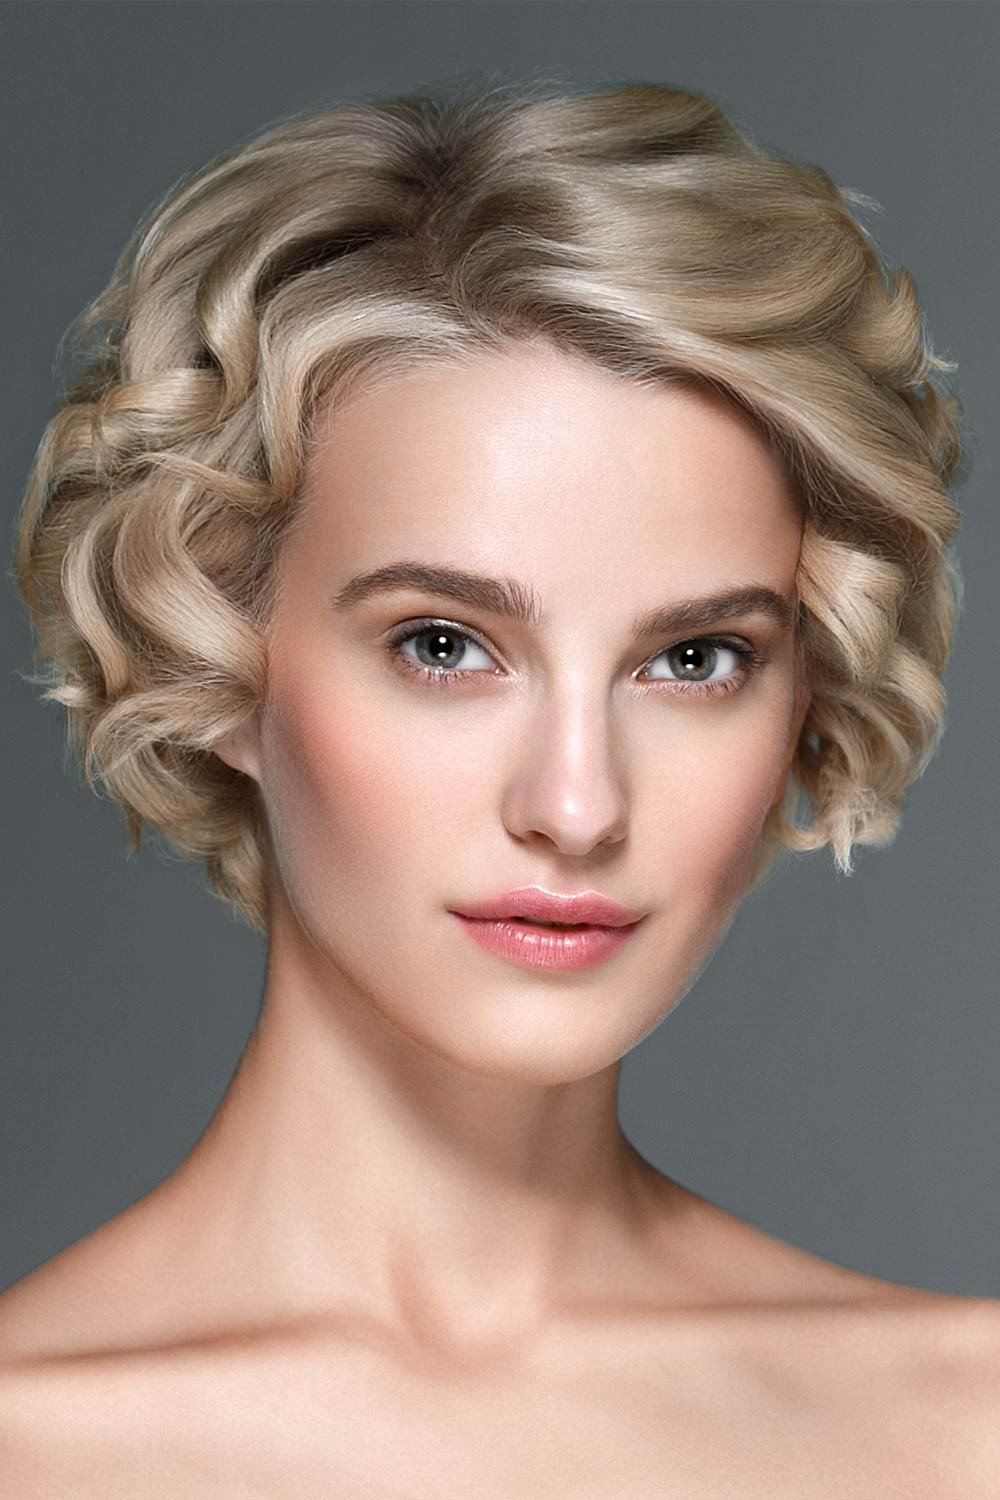 35 Gorgeously Chic Short Hairstyles For Fine Hair Ladies - 233